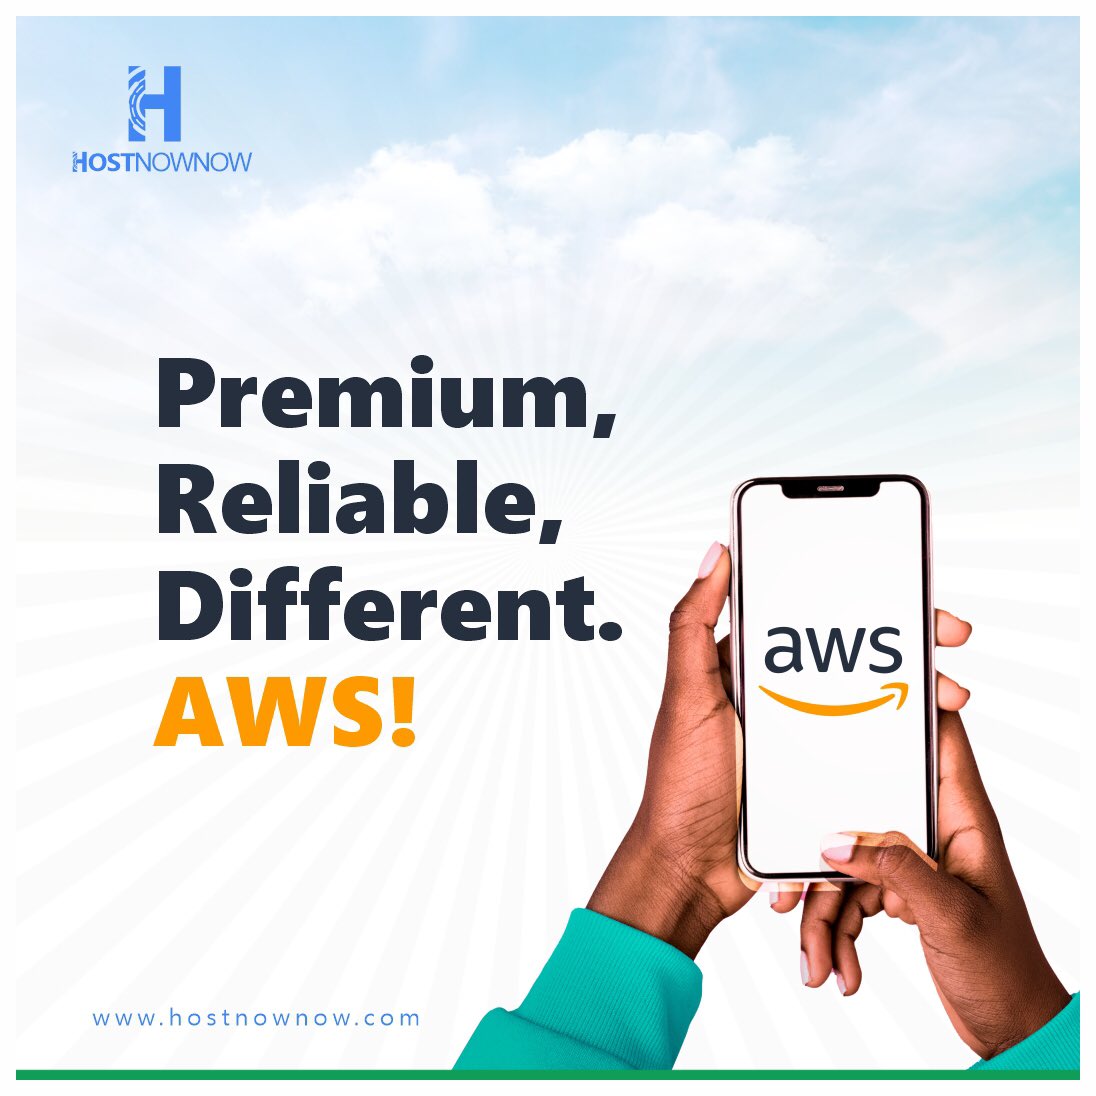 HostNowNow | Tech Company on Twitter: "Enjoy Premium and Reliable Hosting  Deploy your products to the most secure cloud hosting platform at  affordable rates. Coming Soon to HostNowNow! #amazonwebservices #hostnownow  https://t.co/eLhiJJo7ul" /